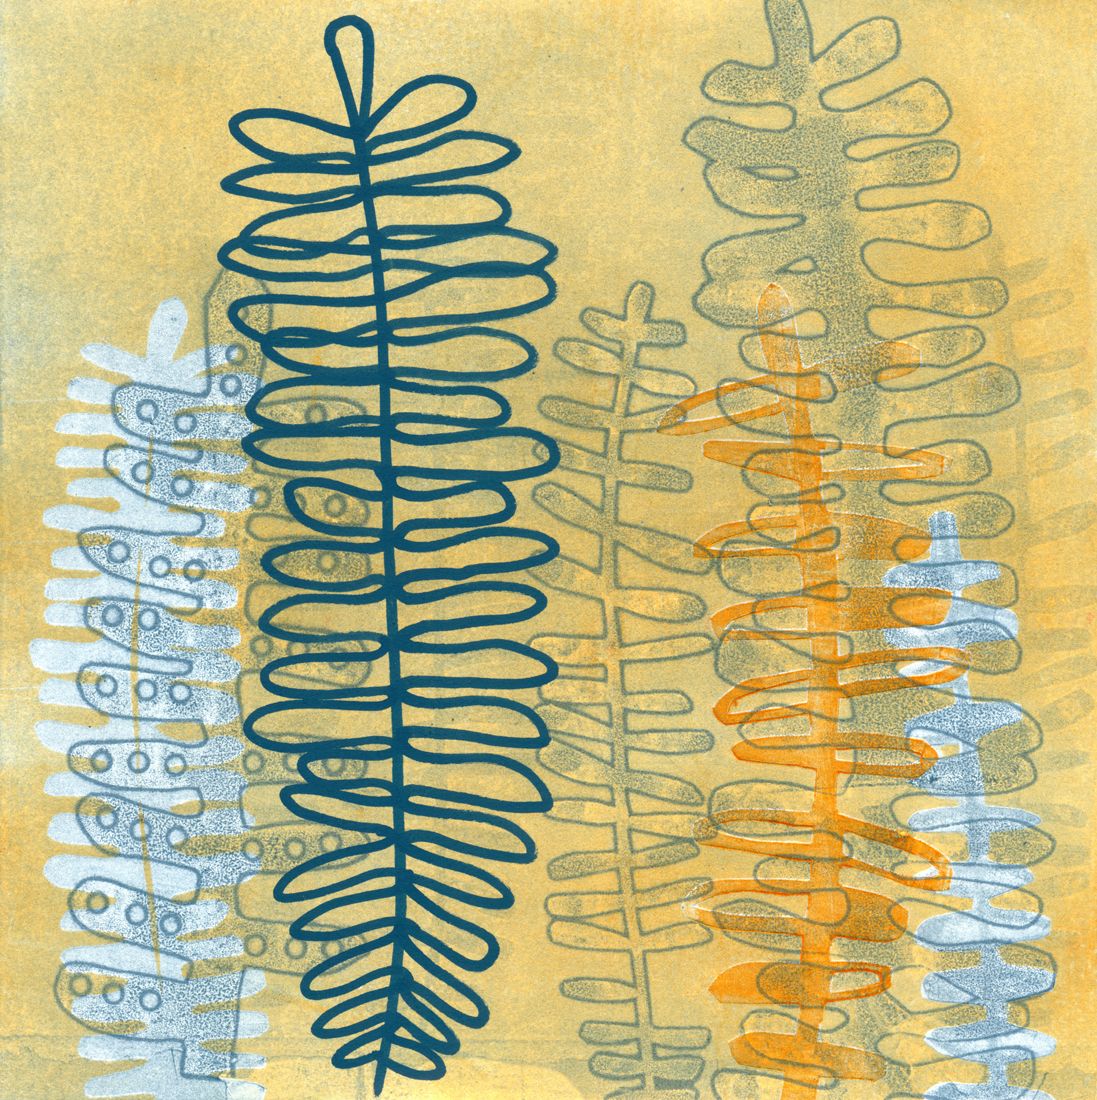 10" x 10" mixed media botanical piece with a fern pattern in indigo blue and orange, monoprint with paint